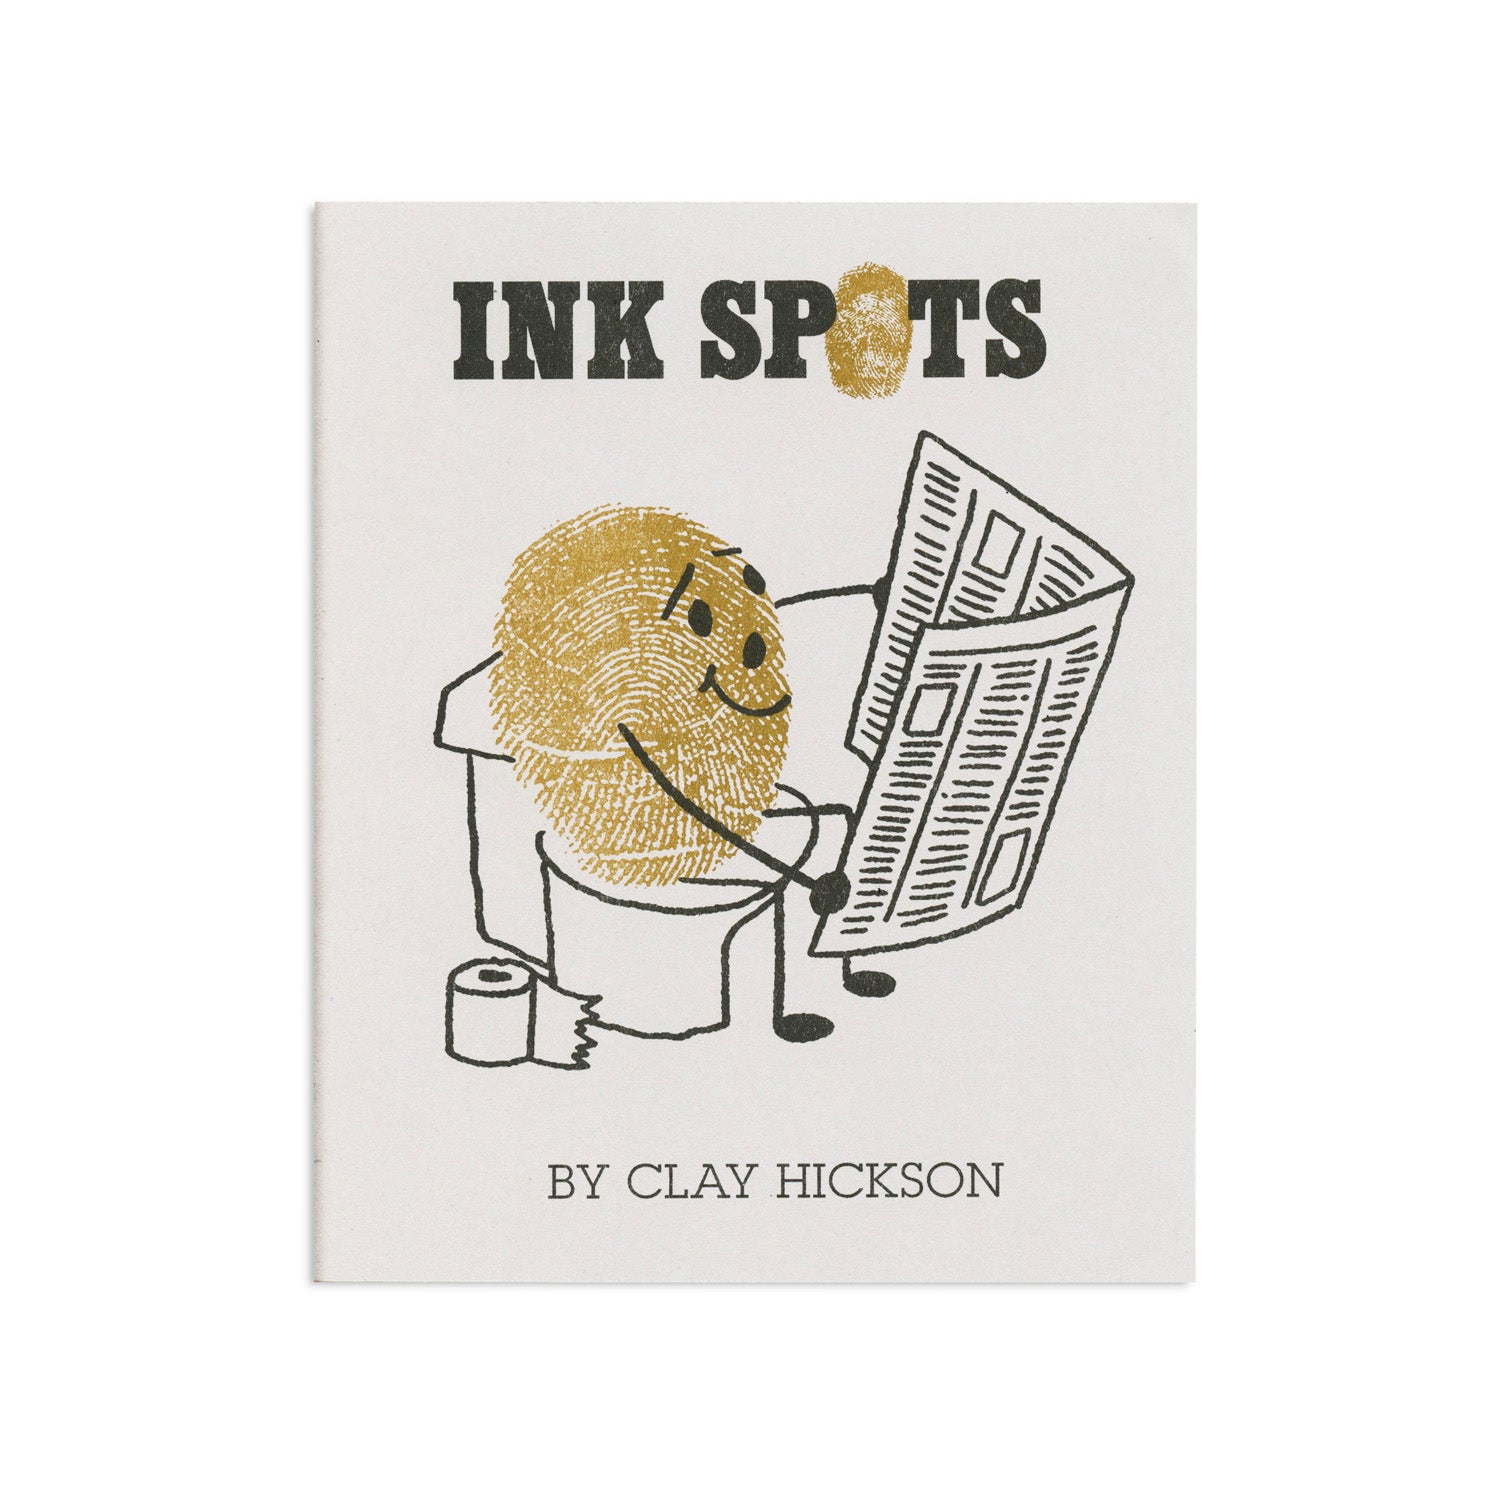 Ink Spots by Clay Hickson